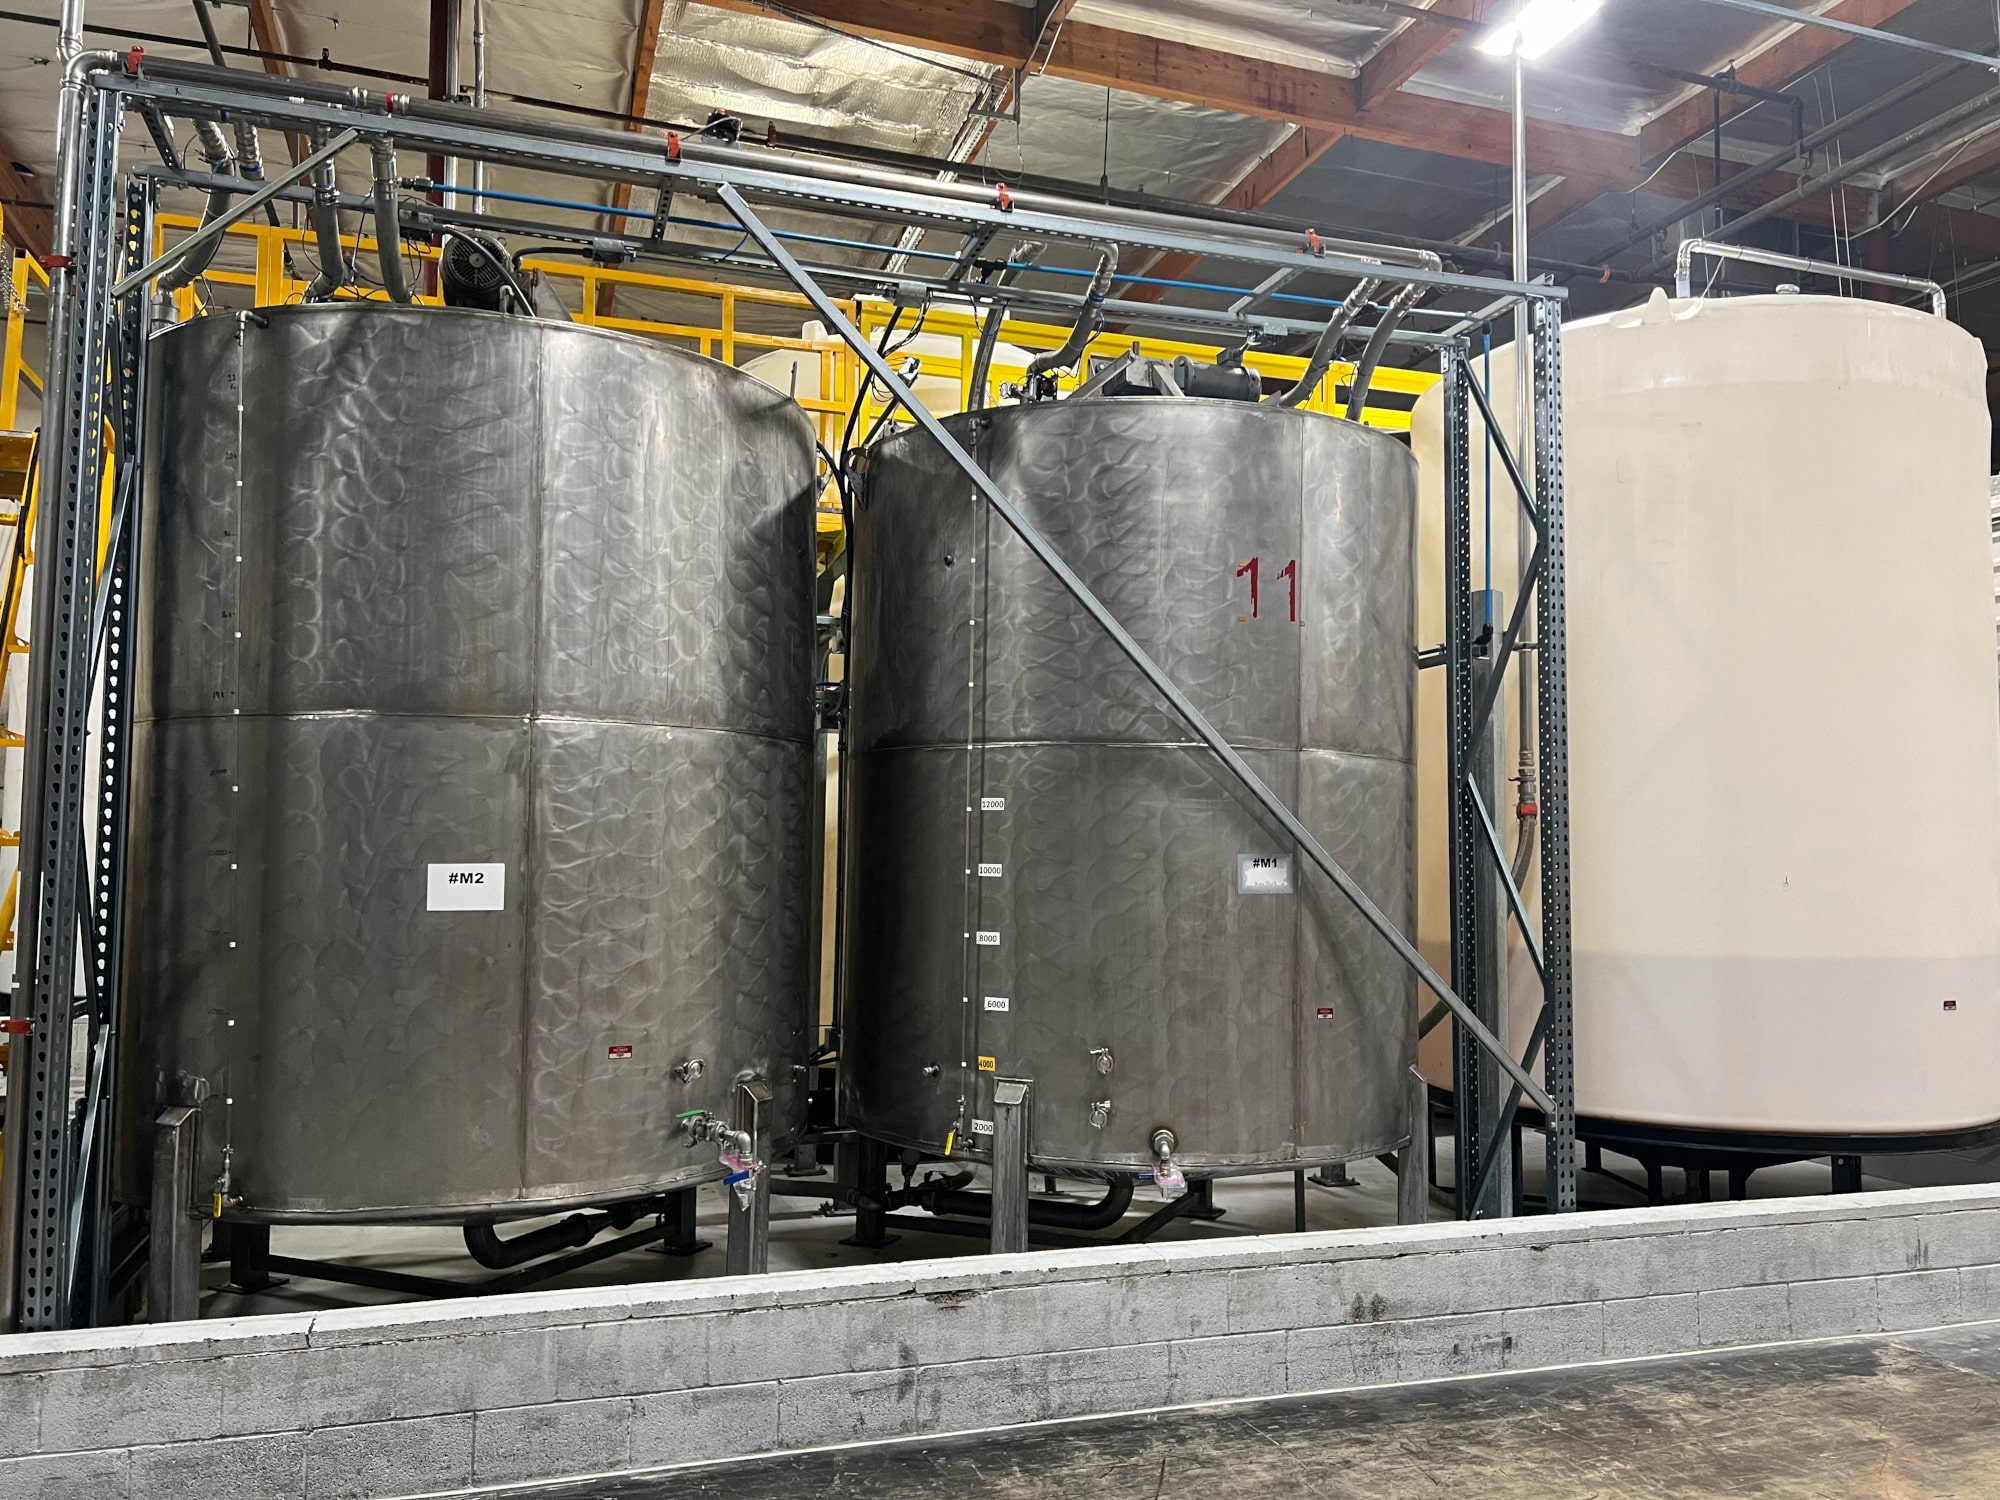 Stainless Steel Tanks for Mixing Cooking Oils